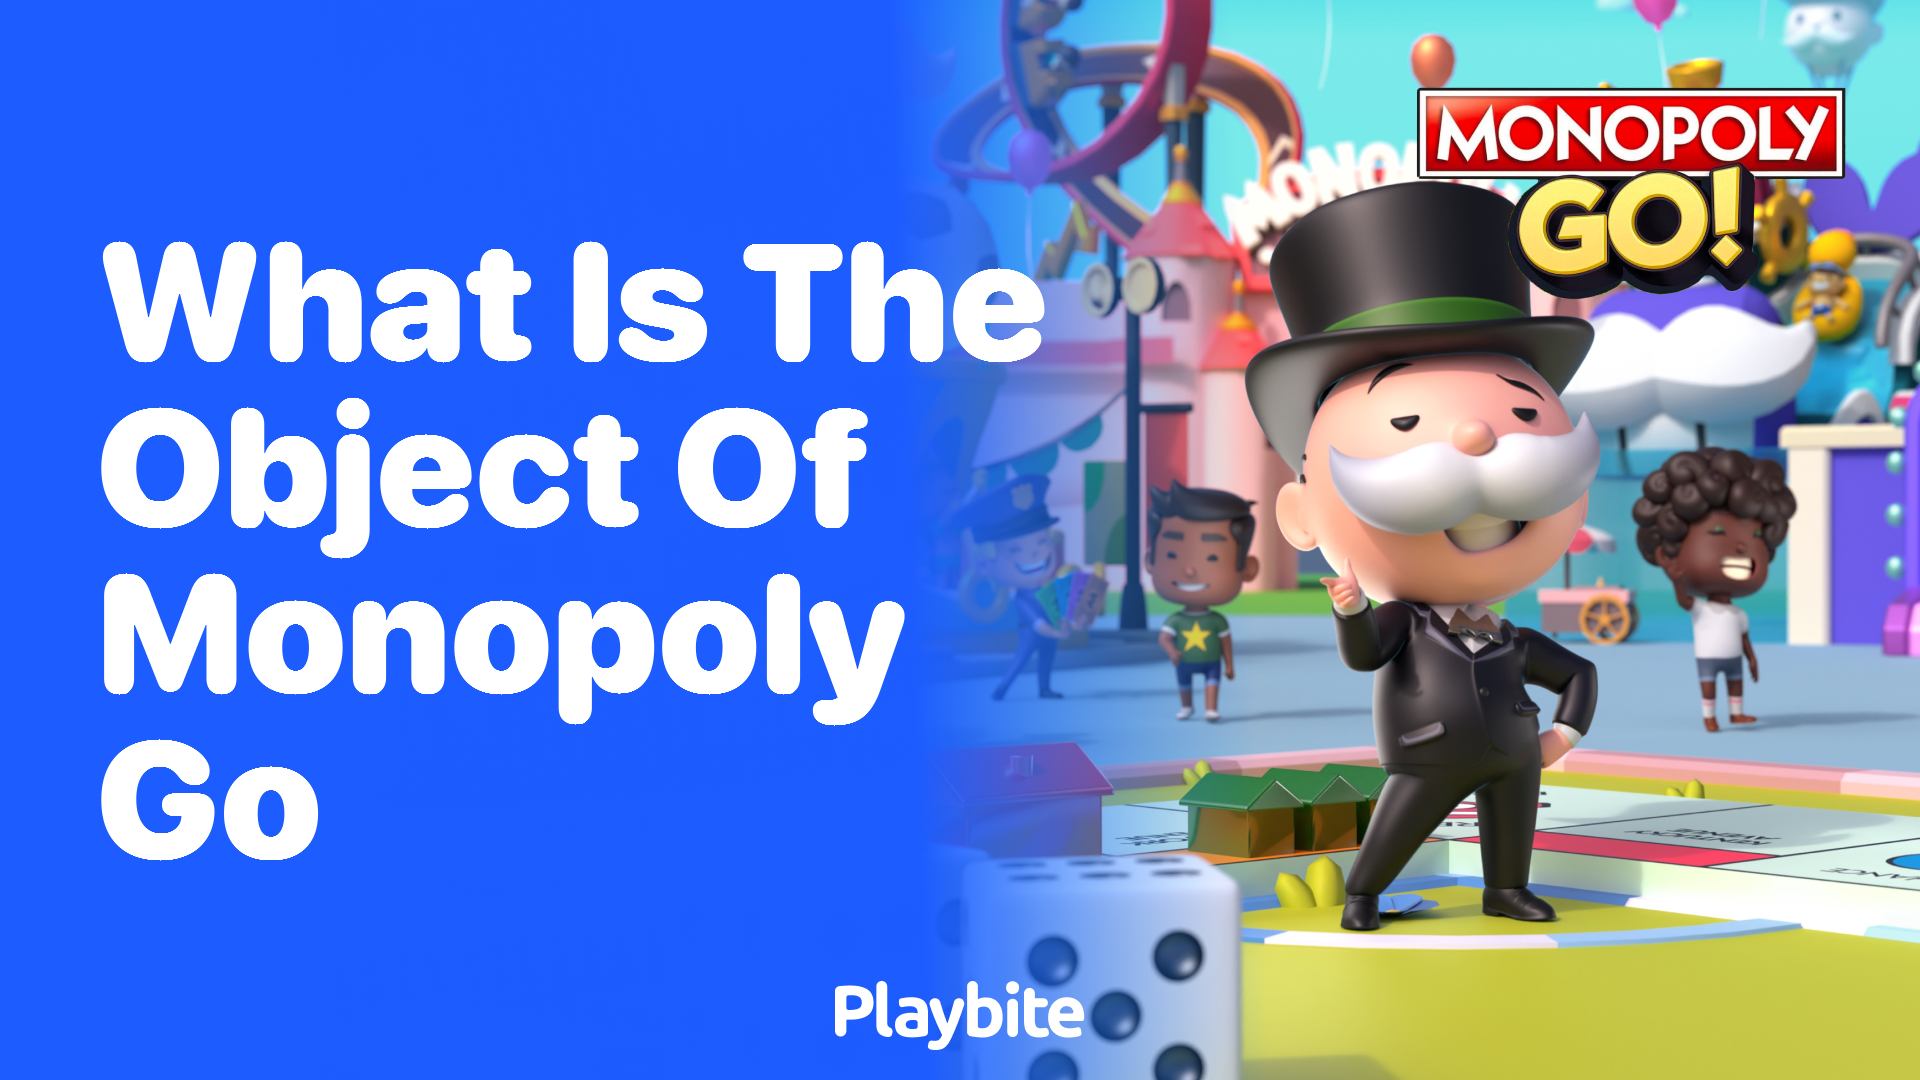 What Is the Object of Monopoly Go?